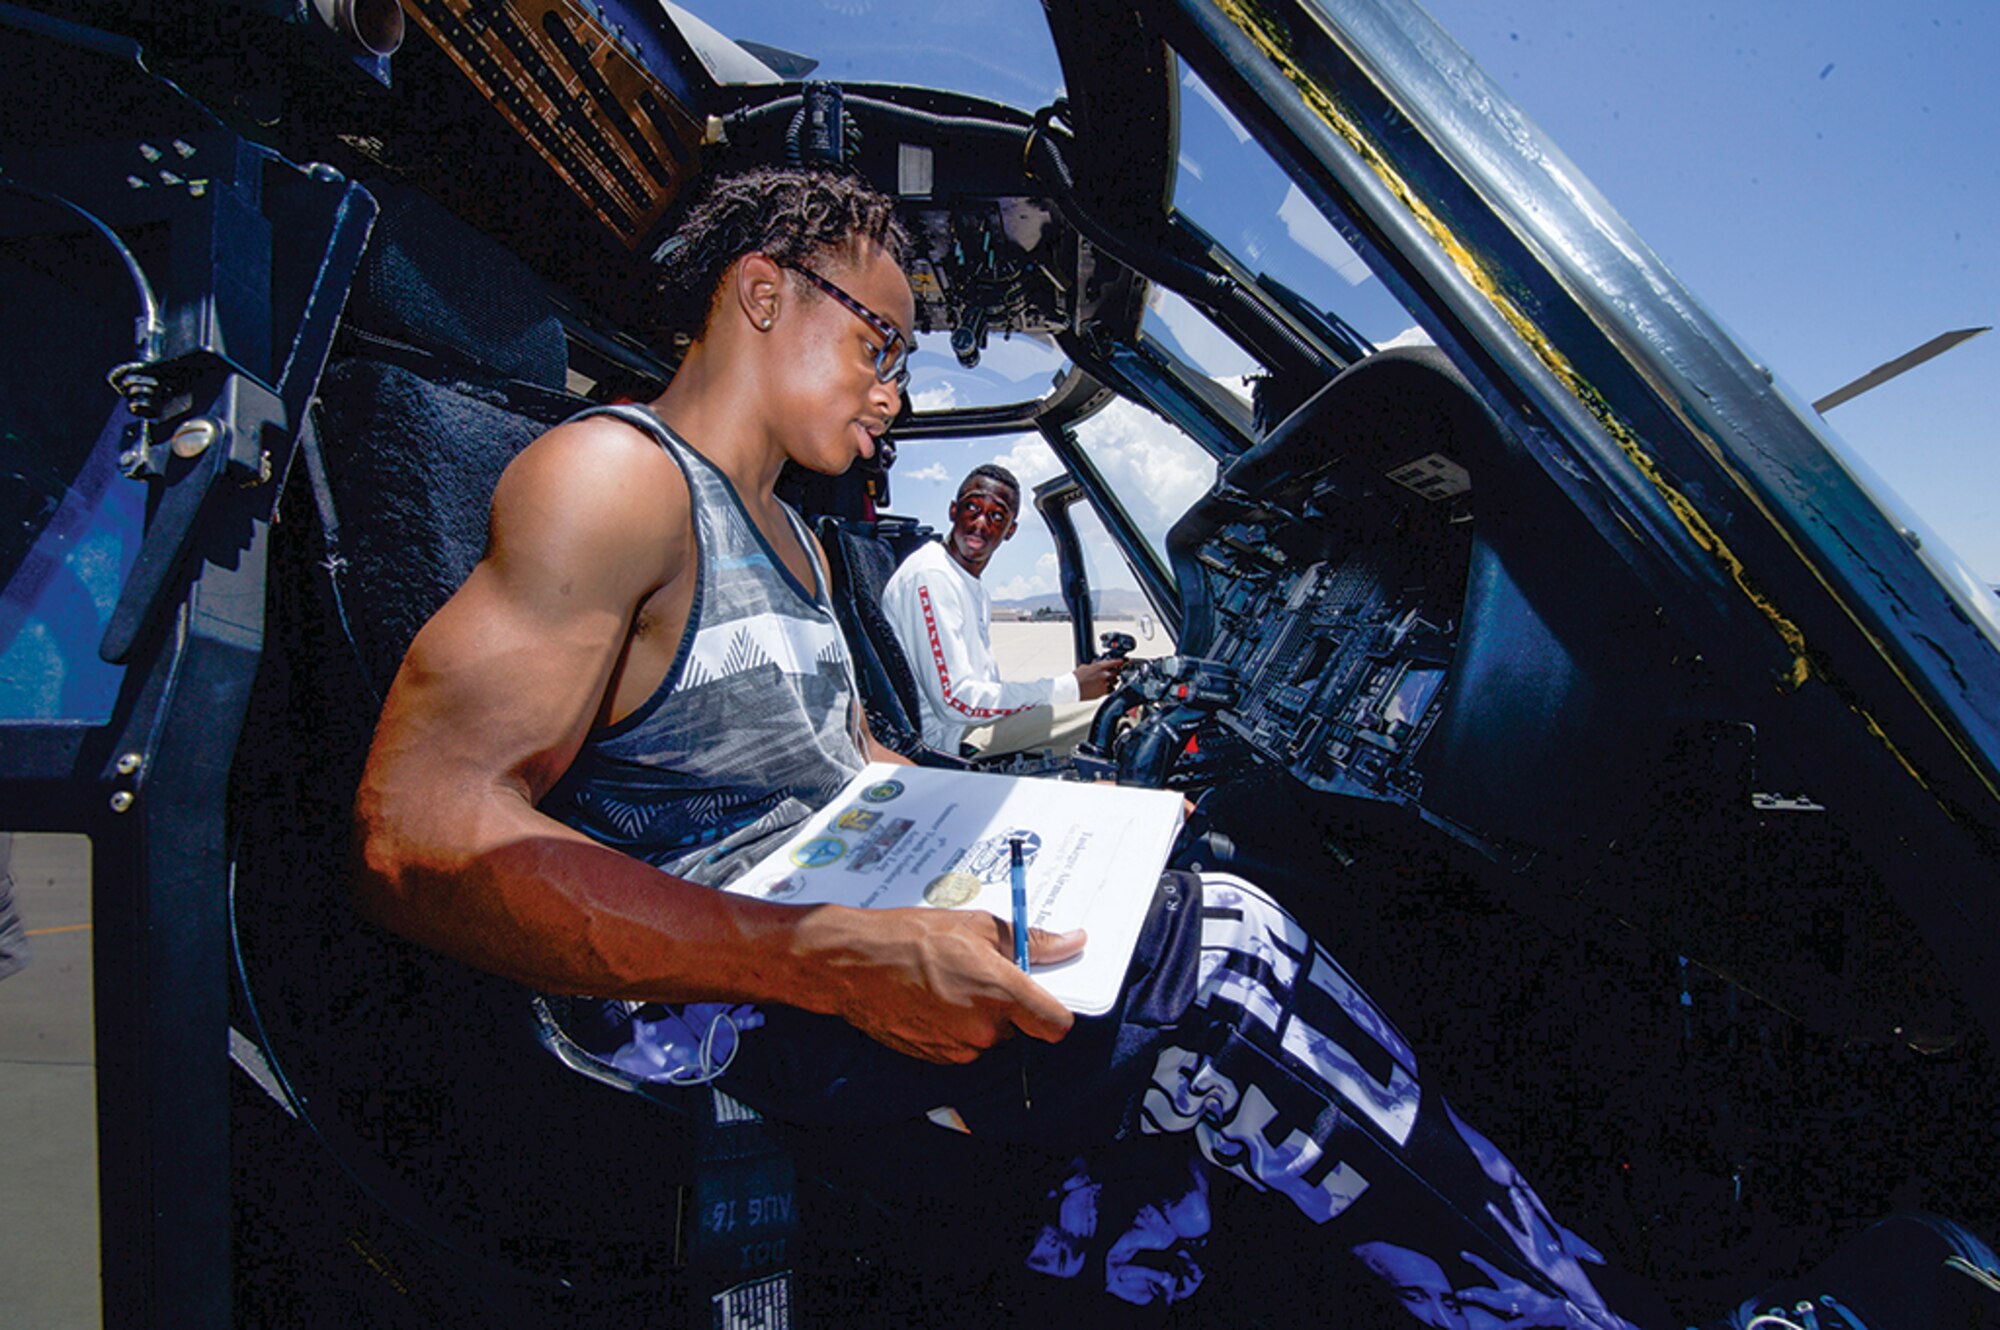 Tuskegee Airmen Inc. Youth Aviation Camp participants Manuel Johnson and Tolu Erinle check out the cockpit of an aircraft on the 58th Operations Wing flightline.